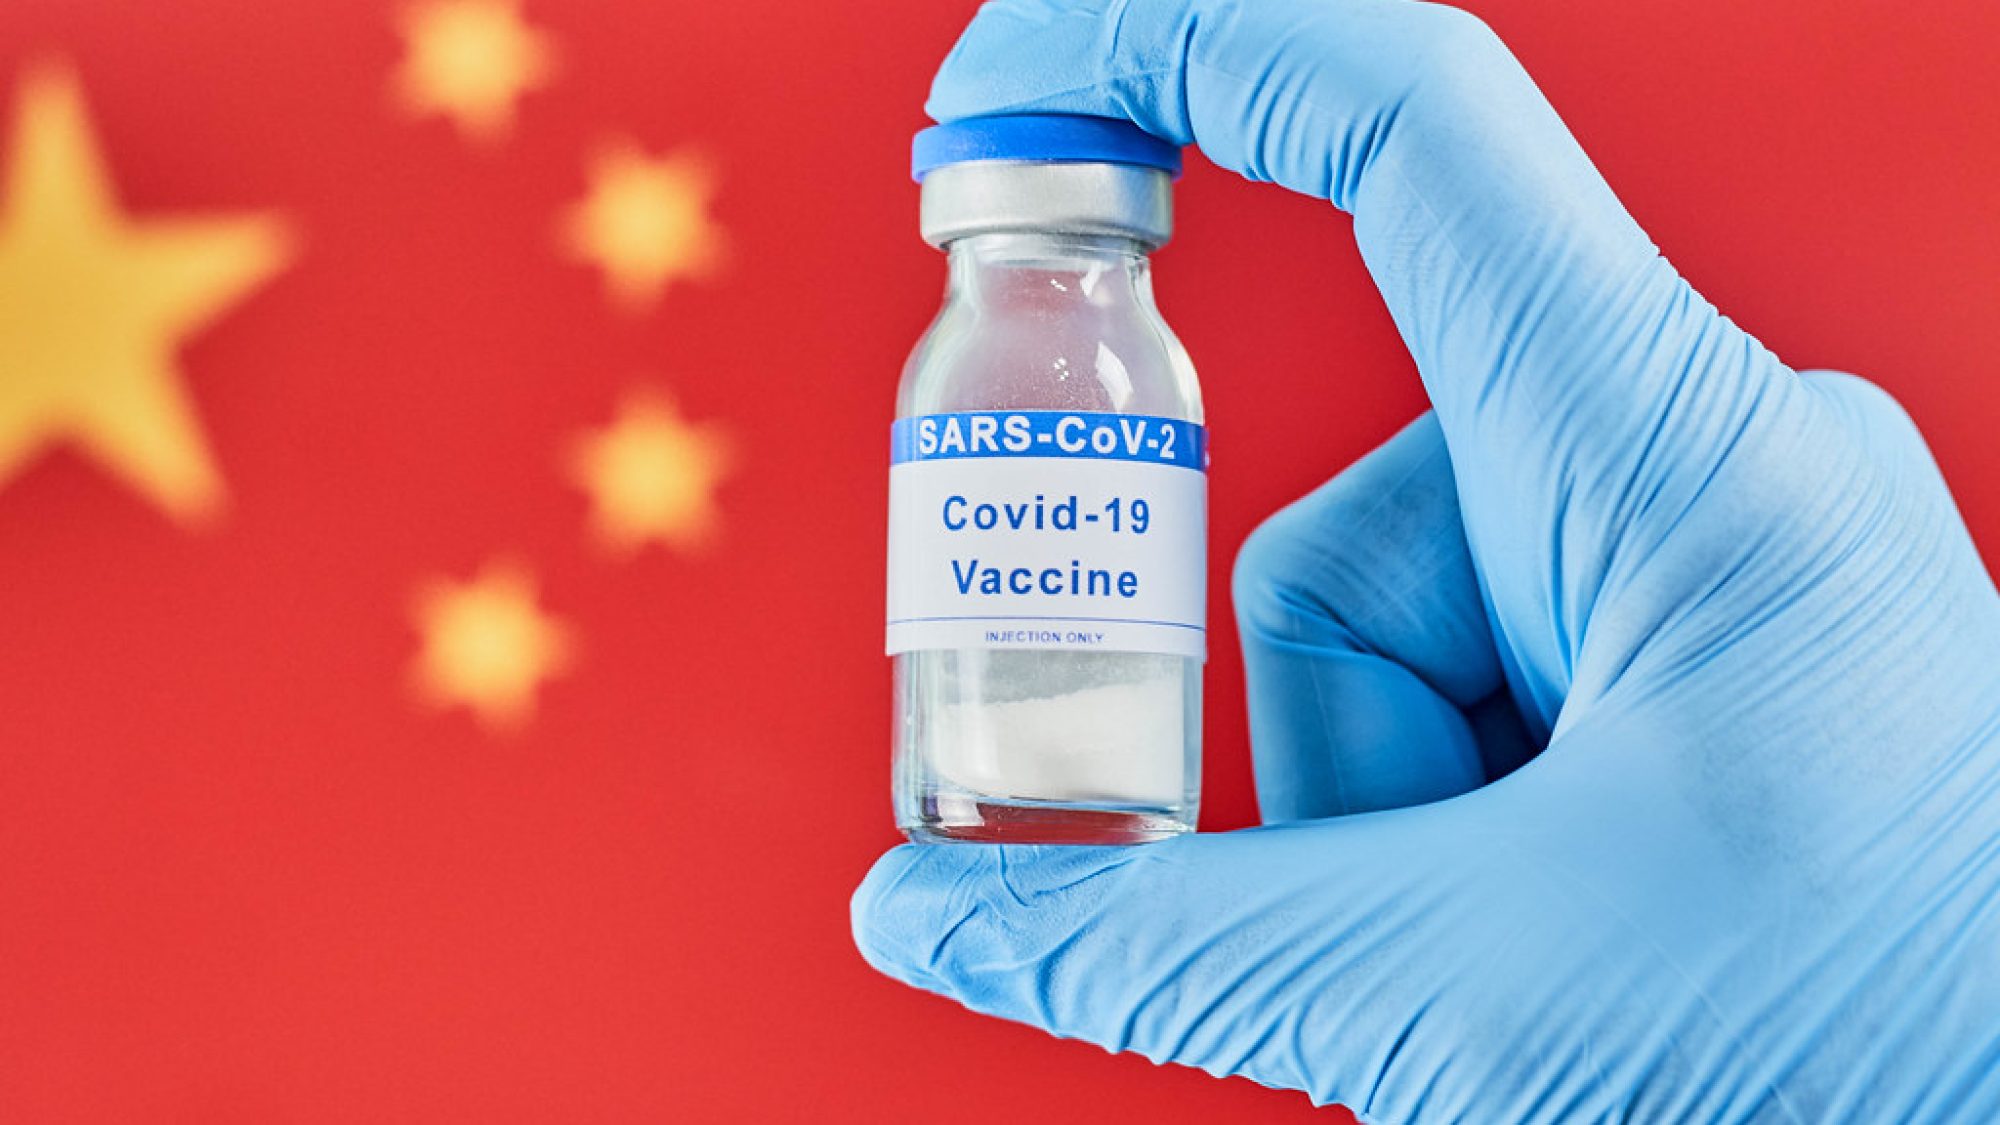 COVID-19 Vaccine with Chinese Flag in the Background